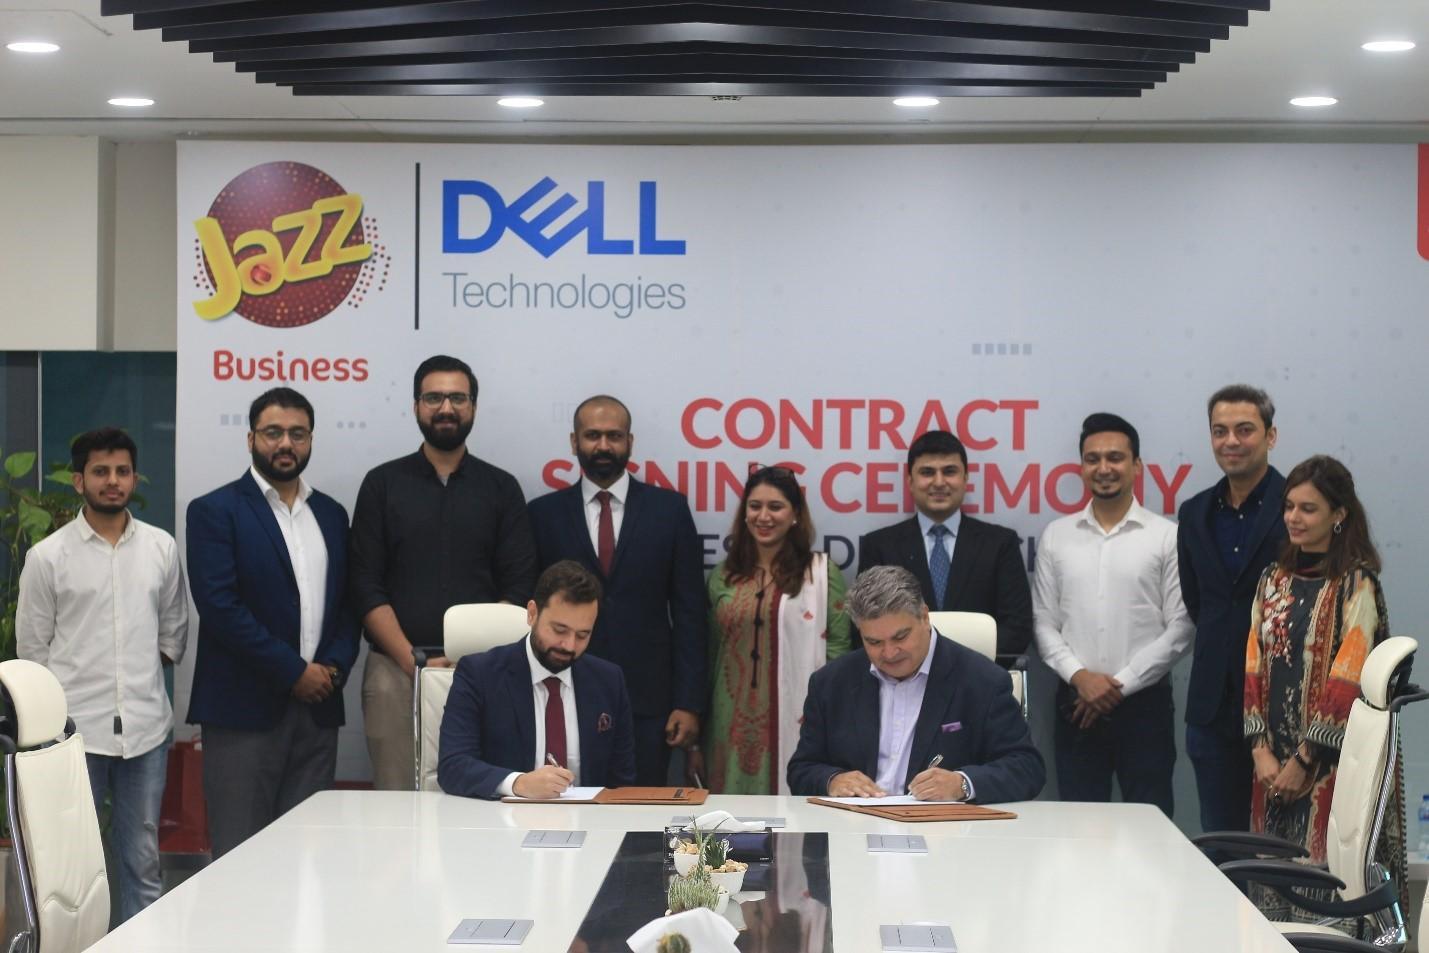 Jazz Business partners with Dell Technologies